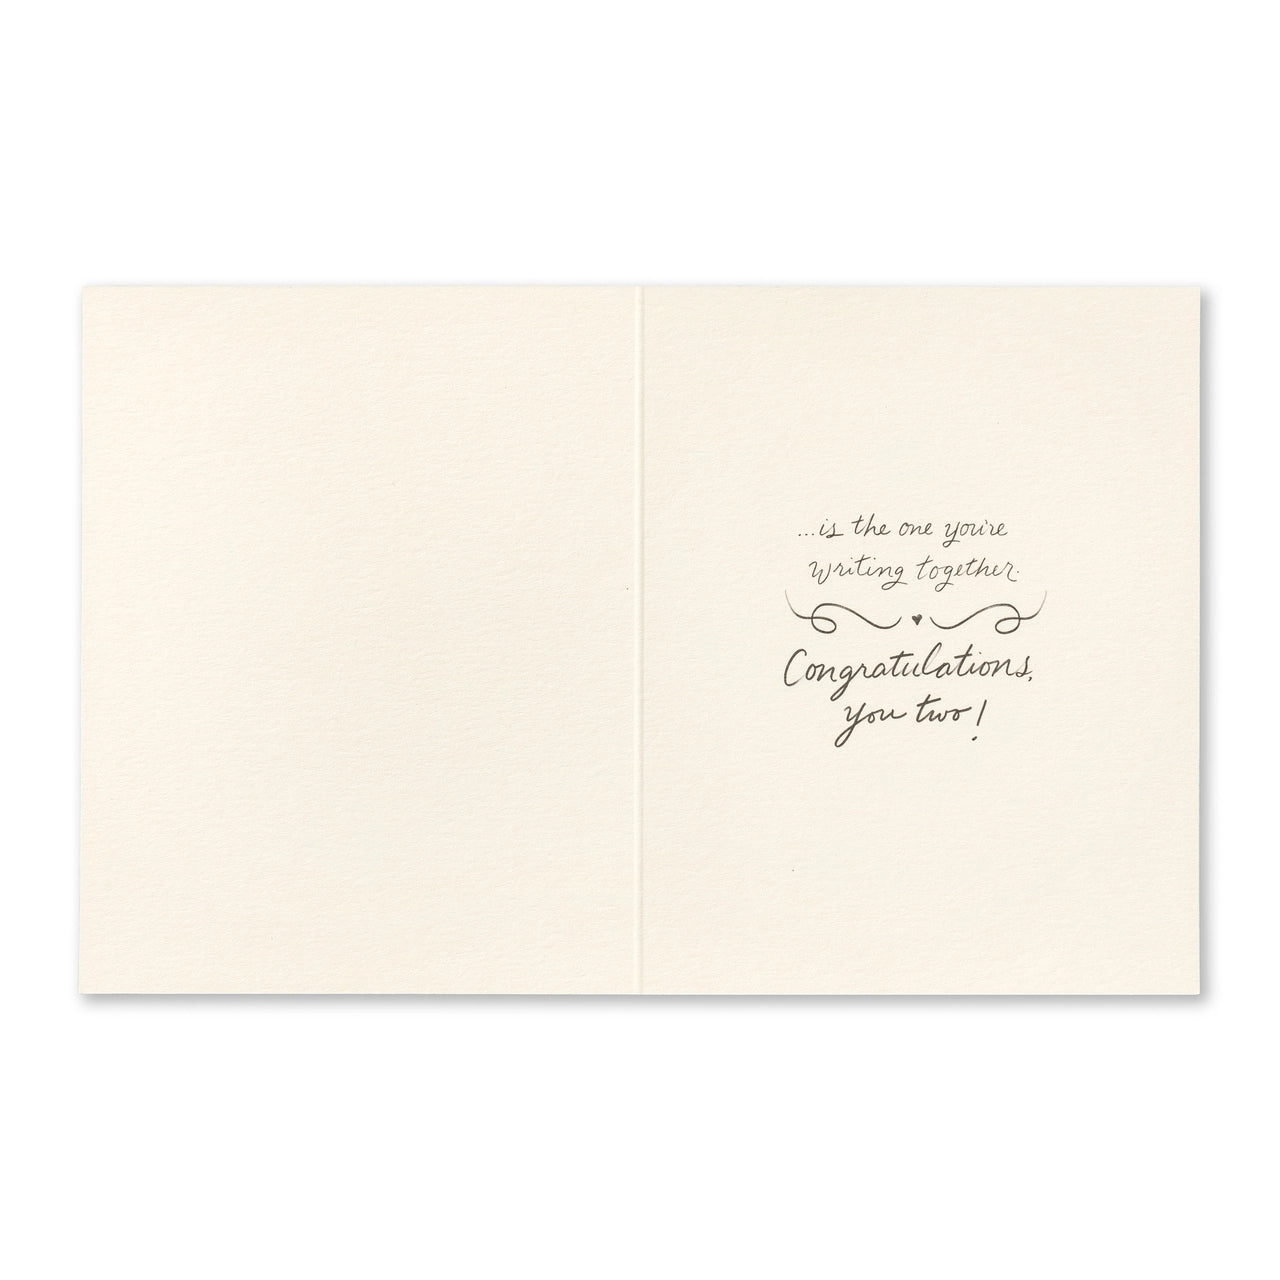 Love Muchly (WED) Love & Wedding Card: The Worlds Best Love Story